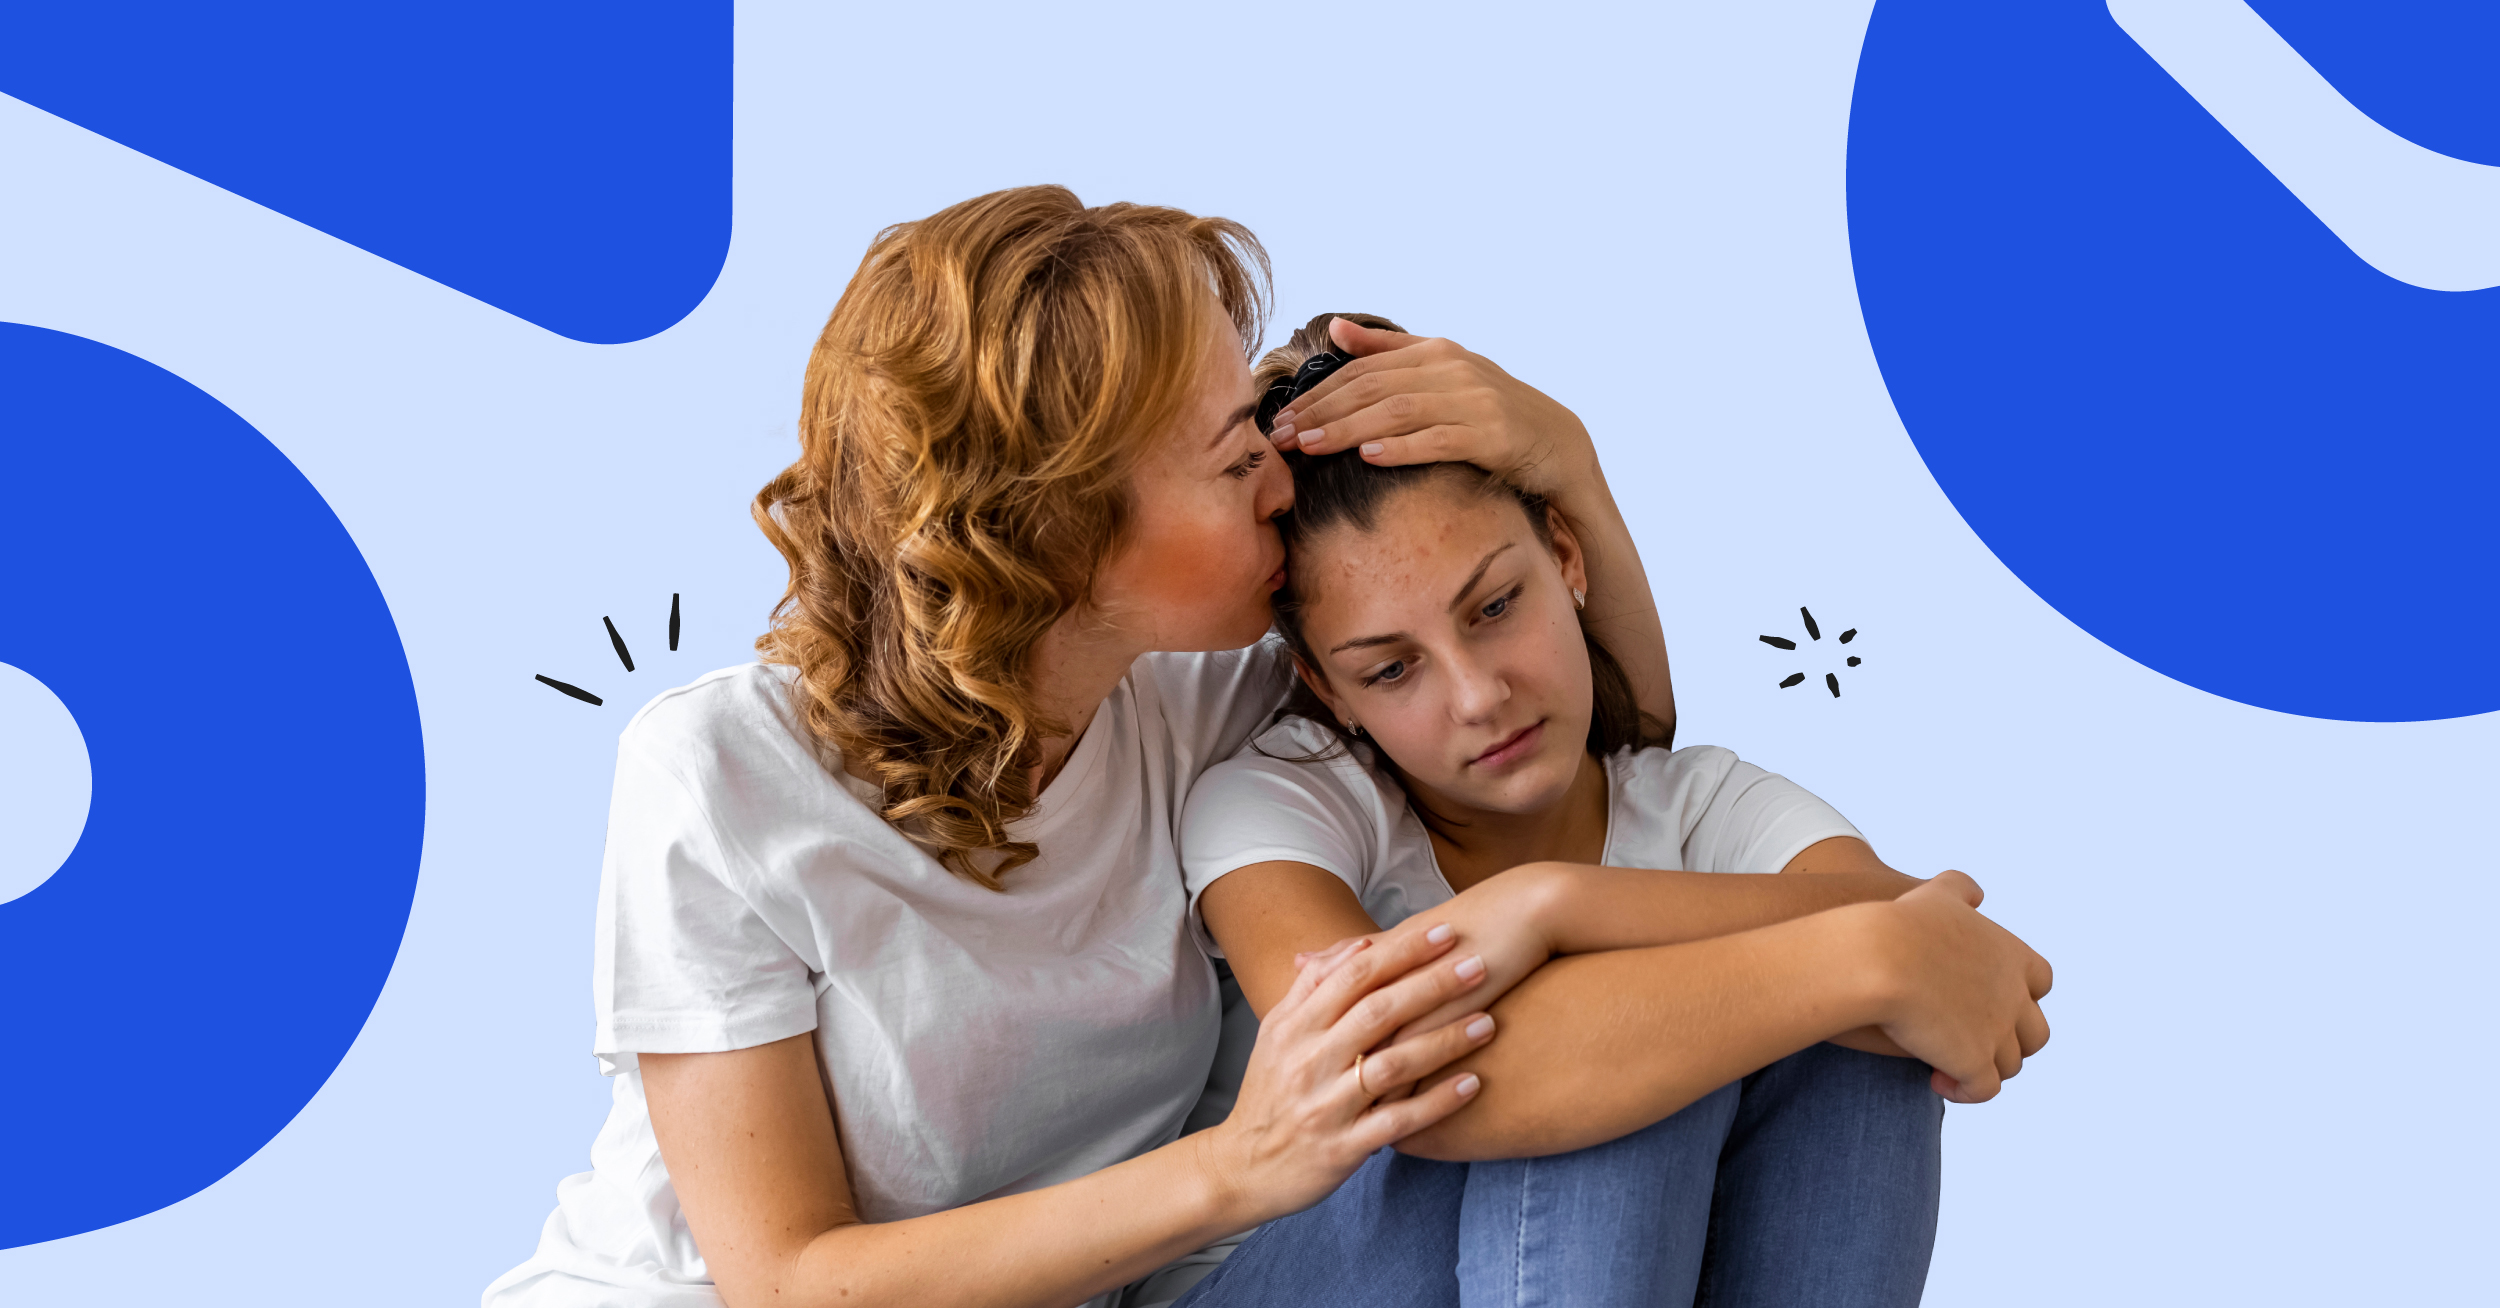 Teen Mental Health: What You As A Parent Need to Know